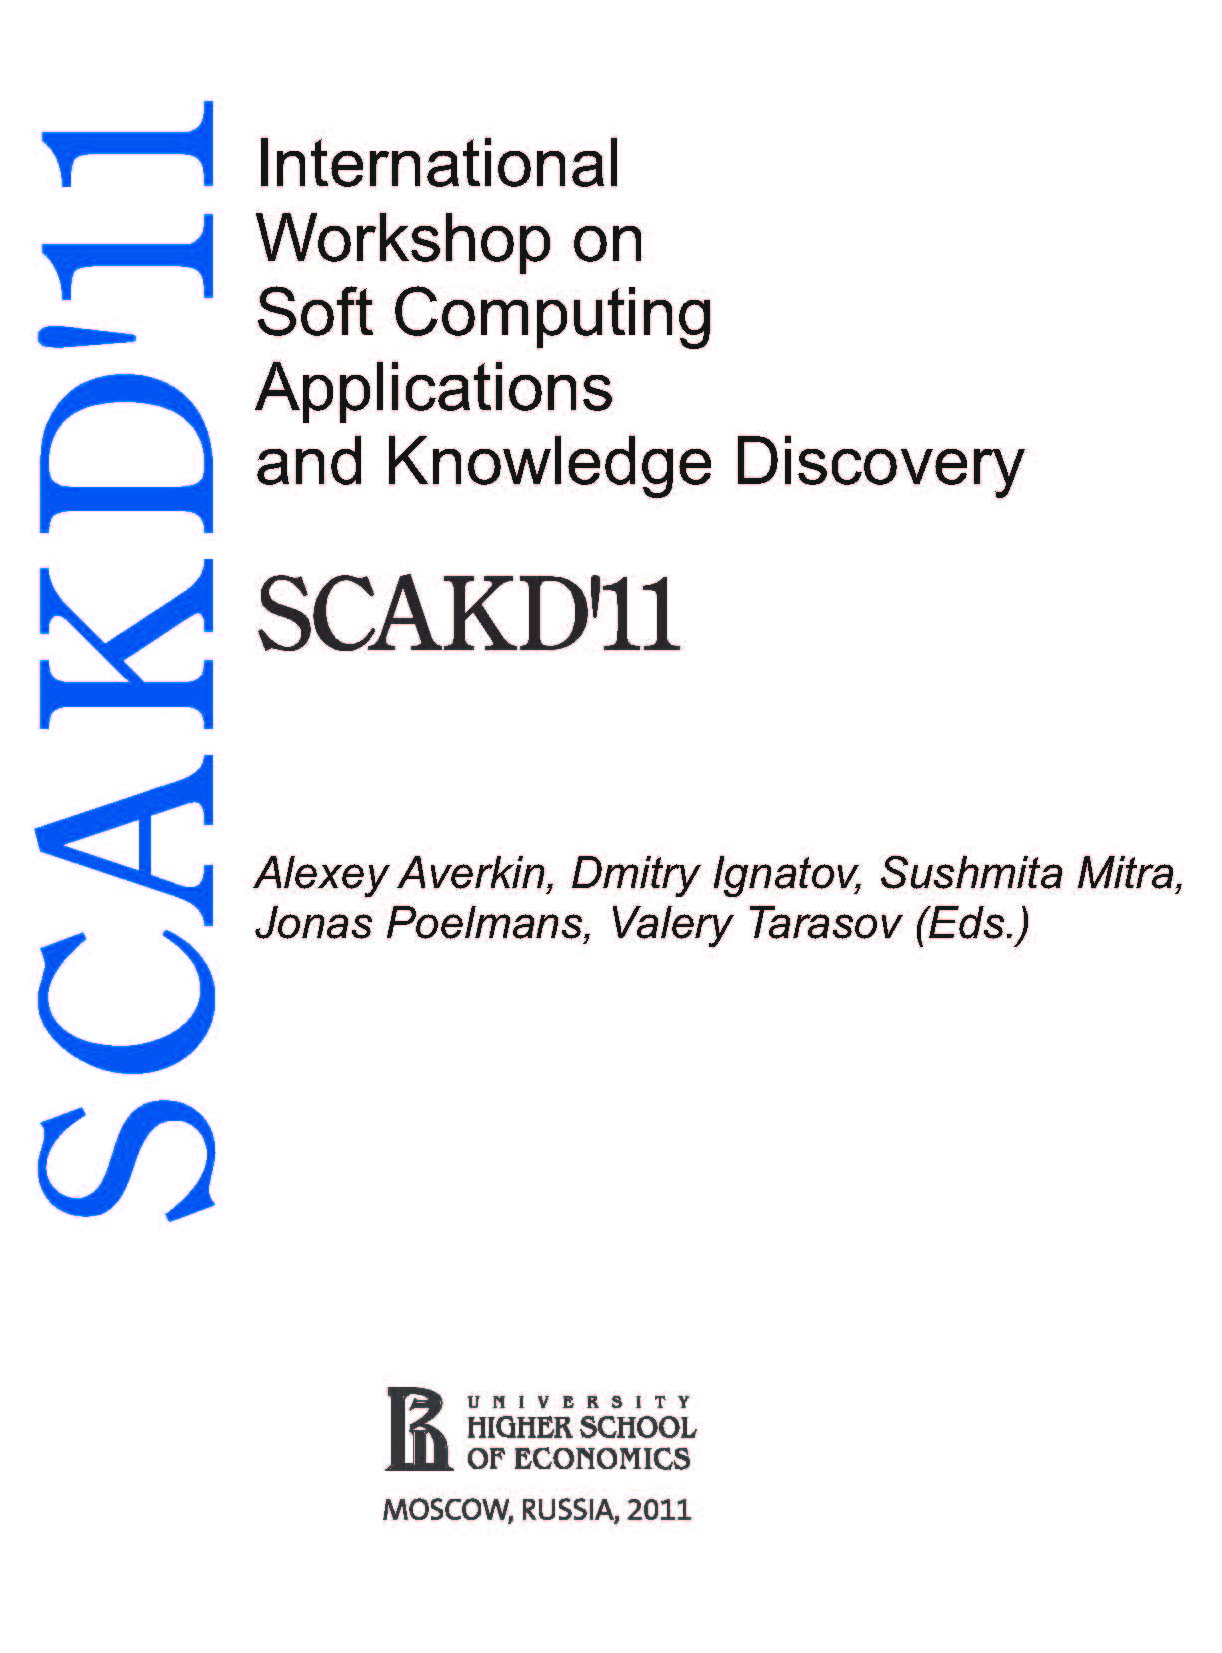 SCAKD'11 - Soft Computing applications and Knowledge Discovery. Workshop co-located with the 13th International Conference on Rough Sets,Fuzzy Sets, Data Mining, and Granular Computing (RSFDGrC-2011) and the 4th International Conference on Pattern Recognition and Machine Intelligence (PReMI-2011), June 2011, Moscow, Russia